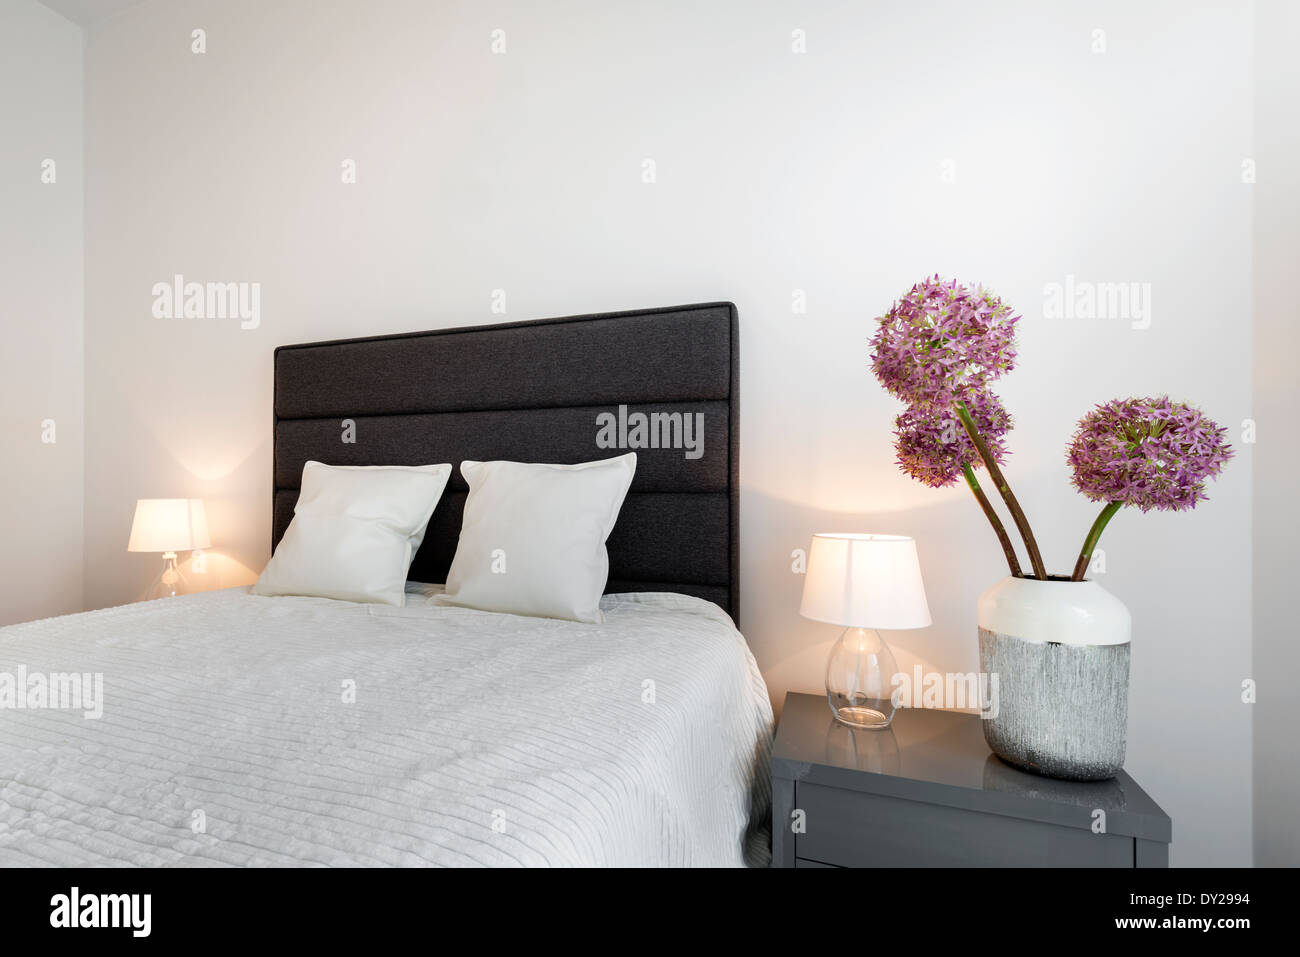 Middle Size Bed In Small Bedroom Stock Photo 68278032 Alamy